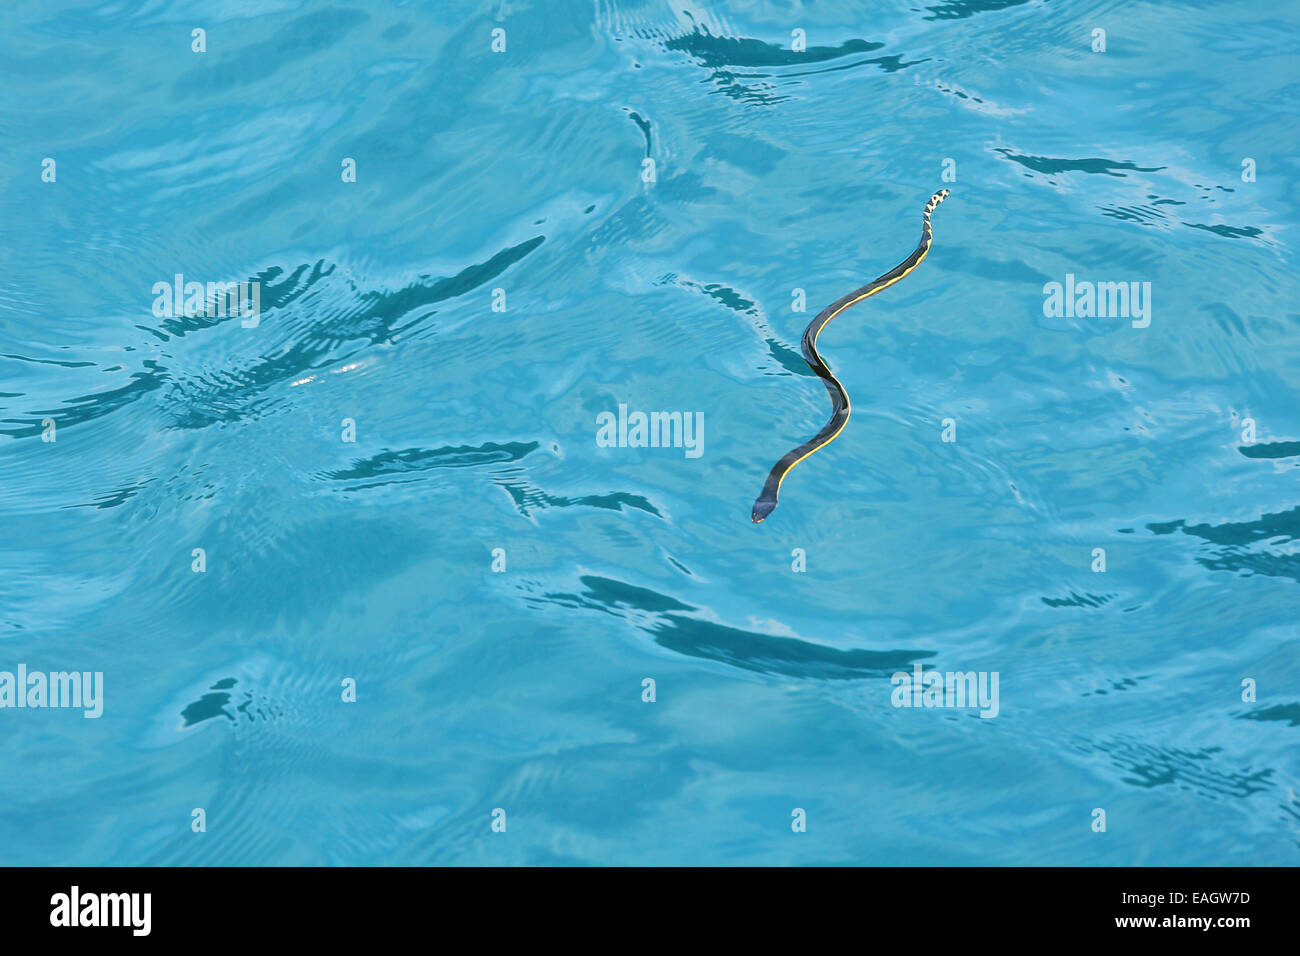 Yellow-bellied sea snake (Hydrophis platurus) in the ocean, Guanacaste, Pacific coast, Costa Rica. Stock Photo